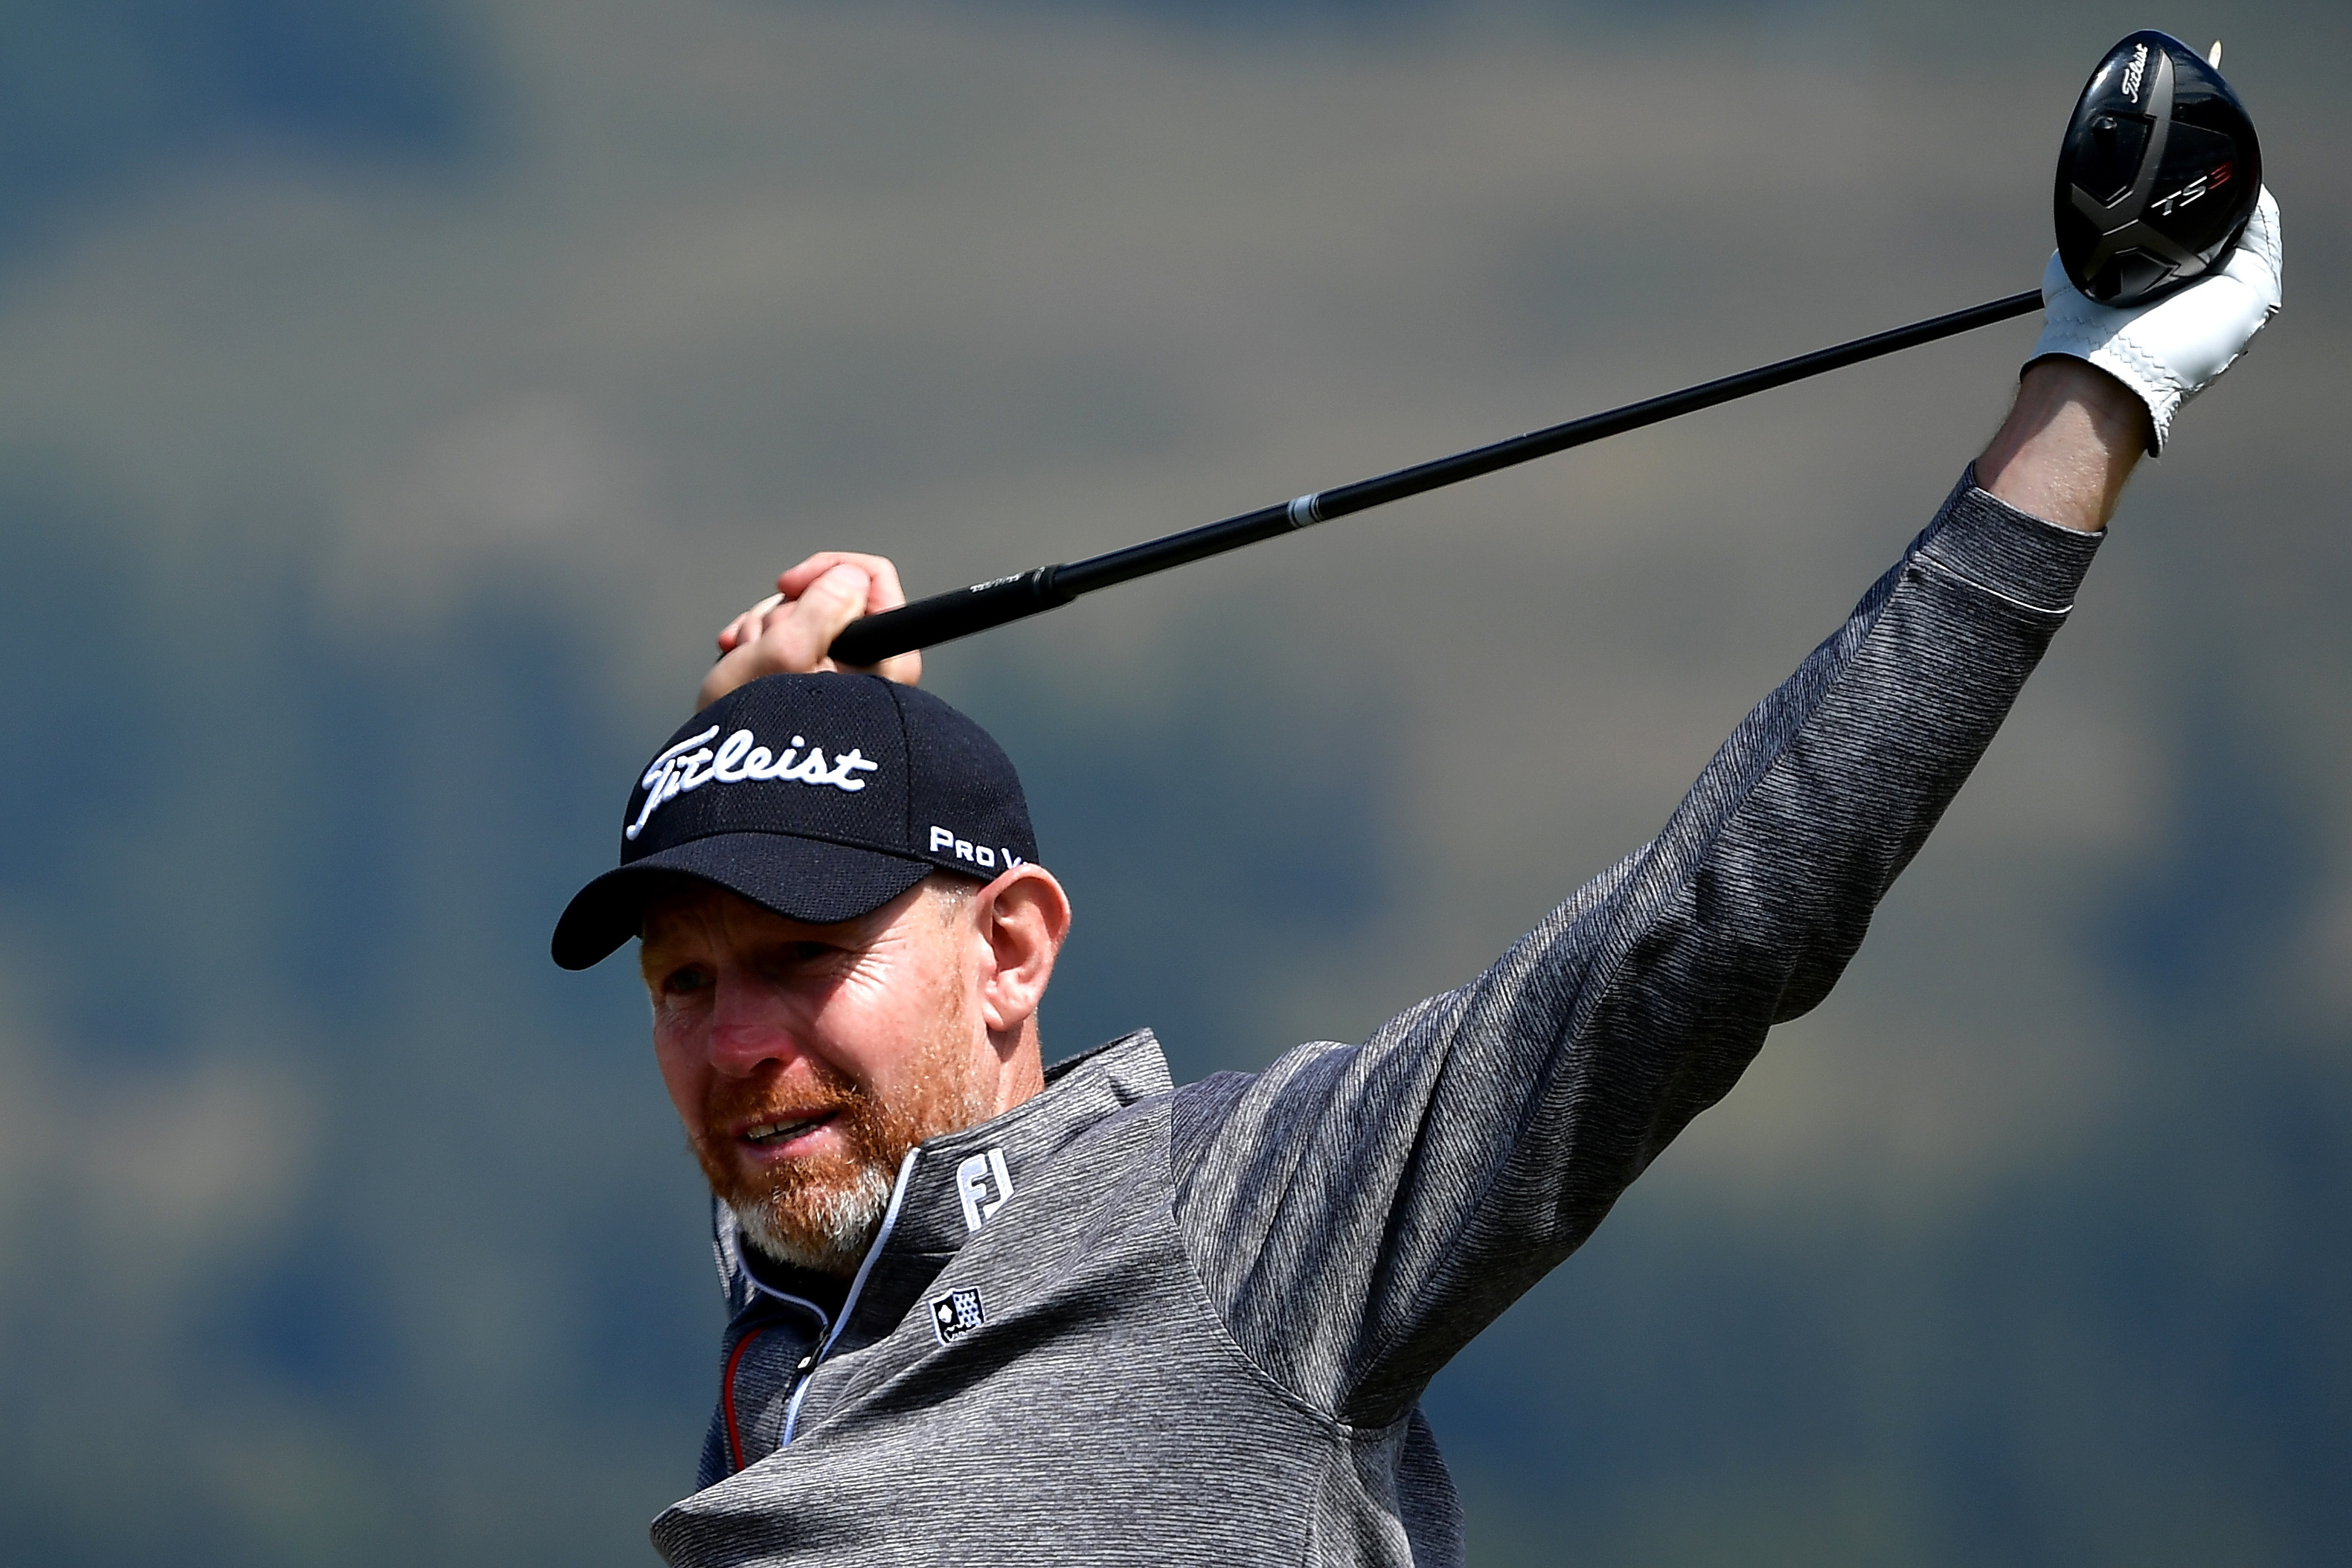 Stephen Gallacher won his fourth European Tour event, the Hero Indian Open, at the weekend.